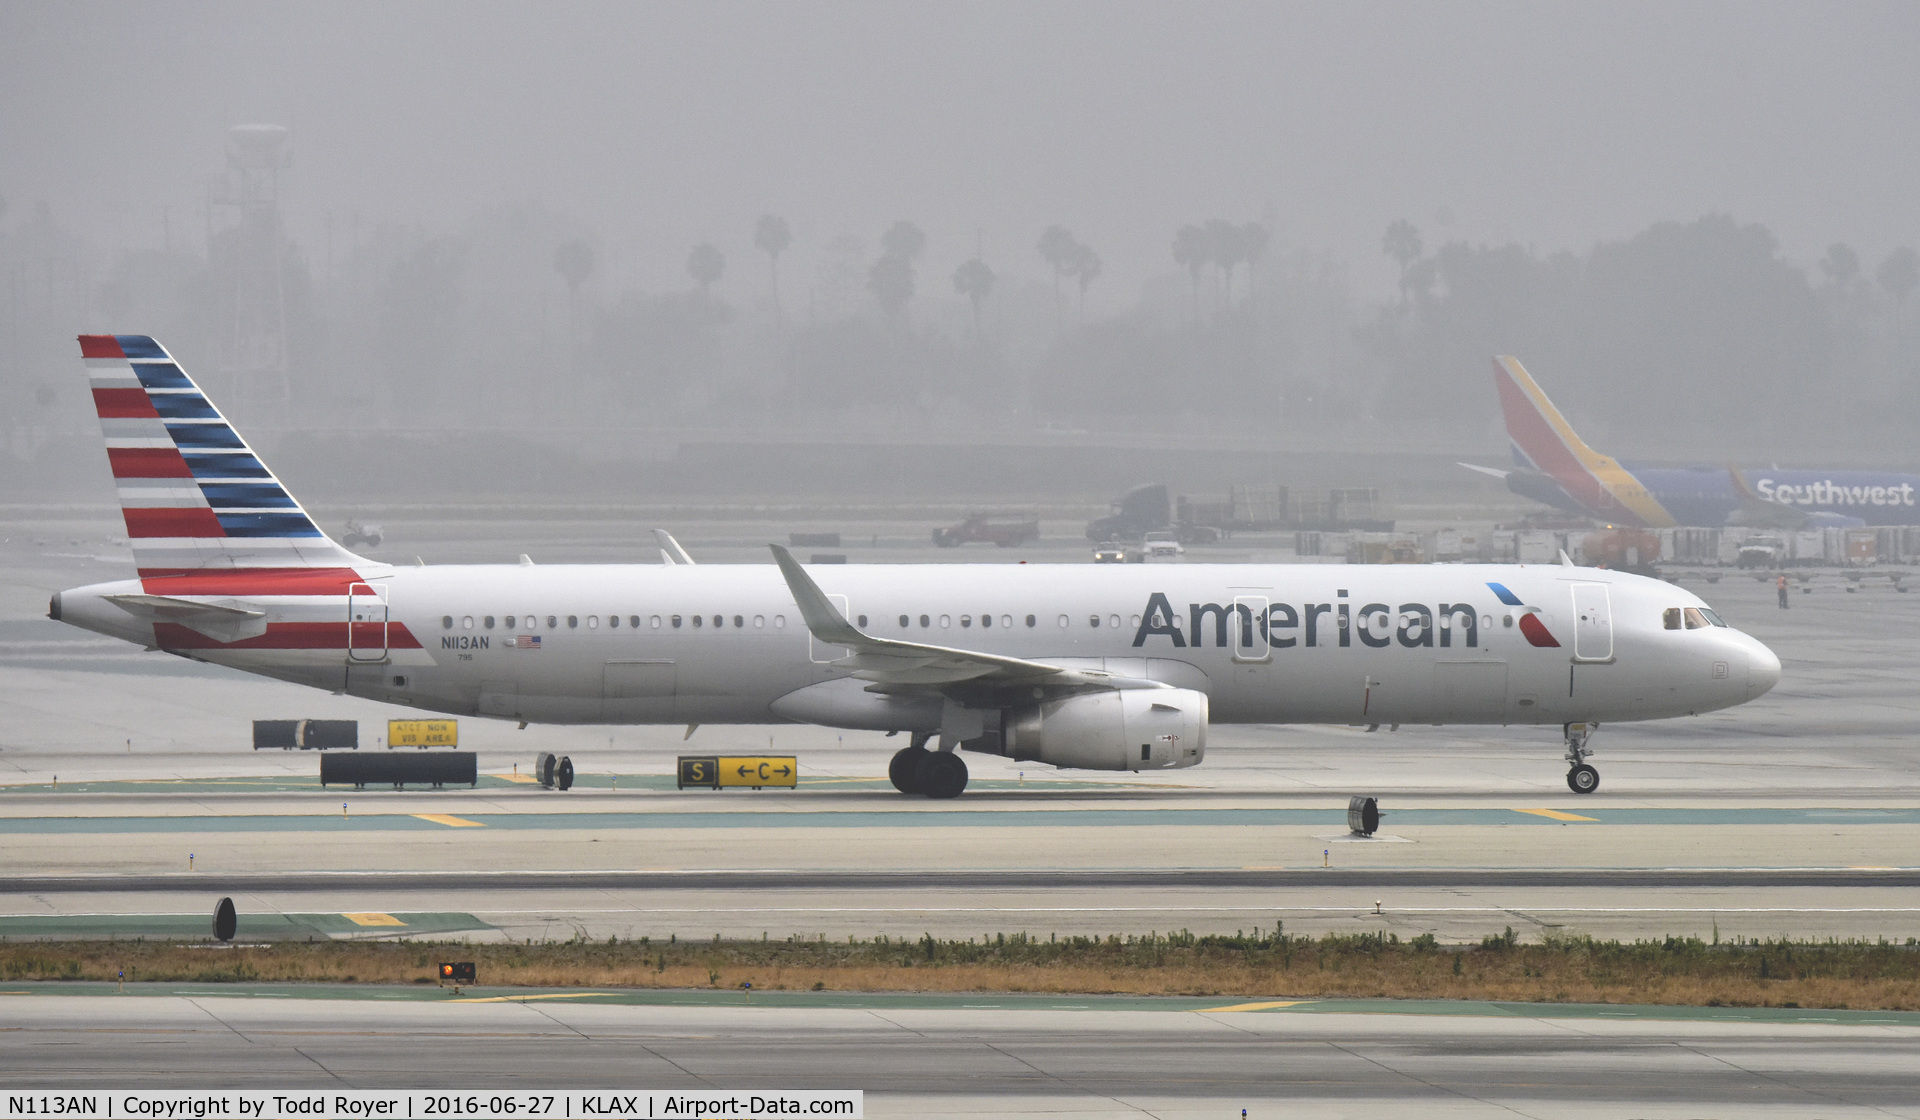 N113AN, 2014 Airbus A321-231 C/N 6020, Taxiing at LAX on a foggy morning